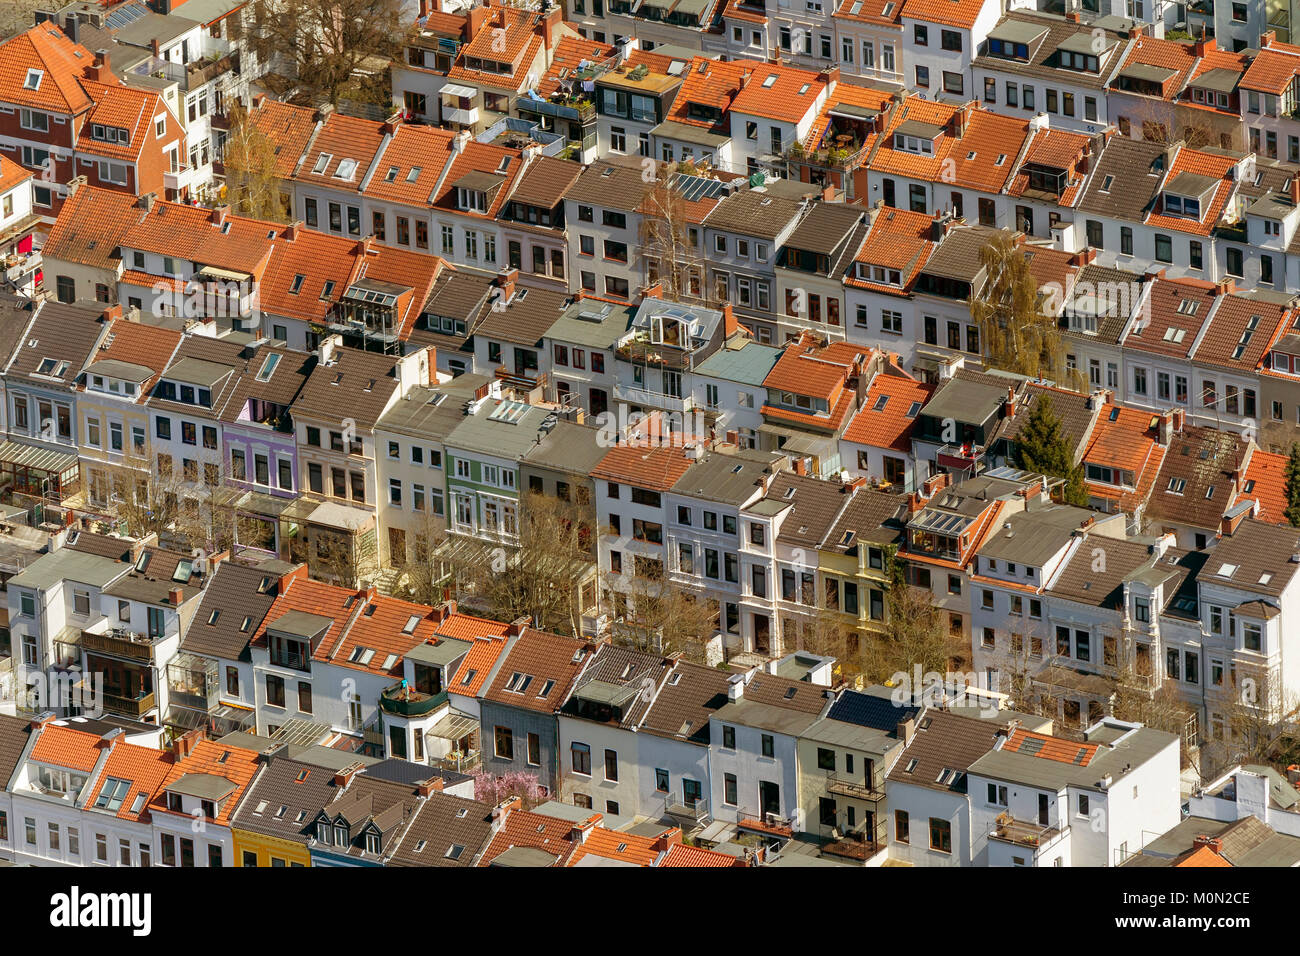 Row of houses in the district Findorff, tenements, flats, red tiled roofs, penthouses, aerial view, aerial photographs of Bremen, Bremen, Germany, Eur Stock Photo